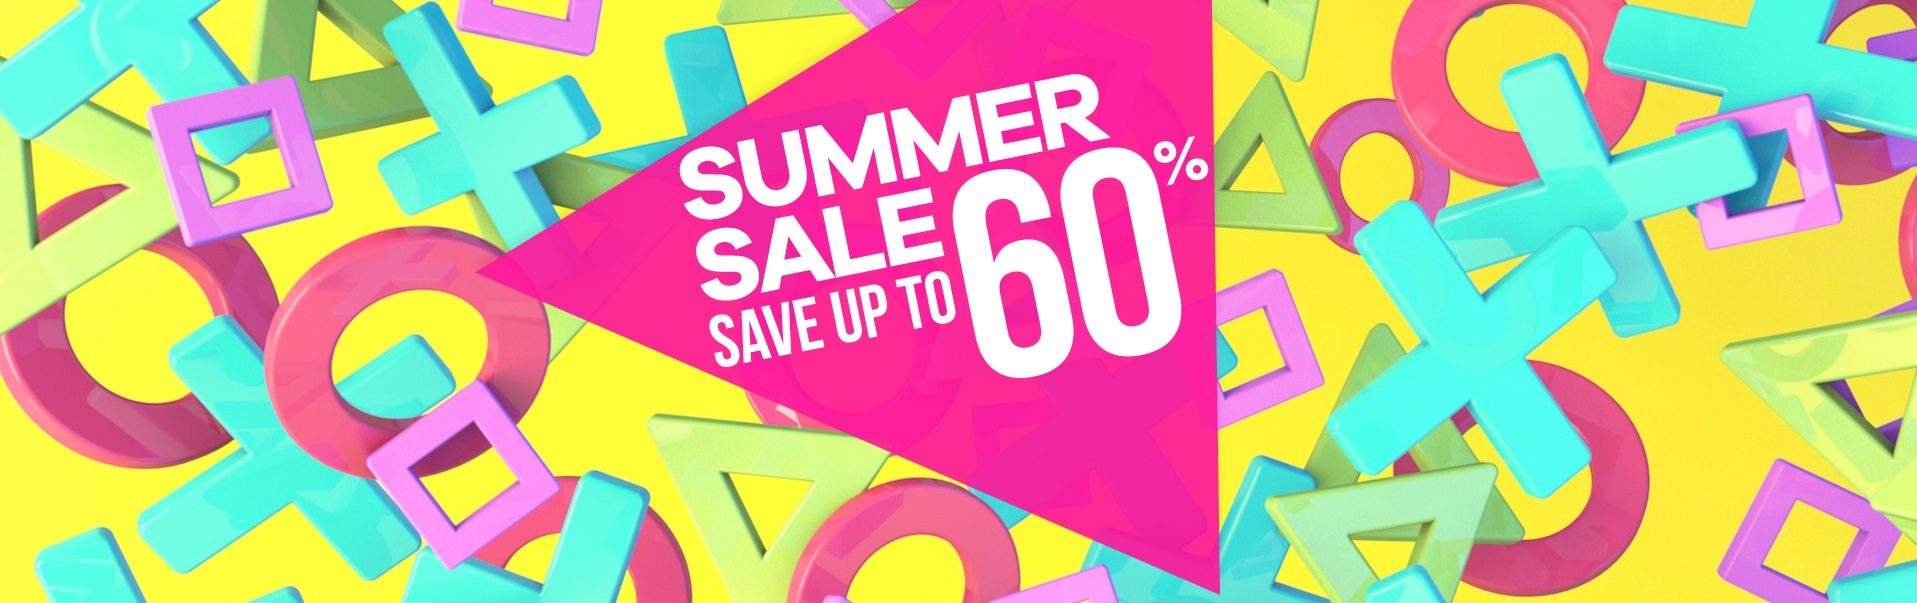 ps store summer sale